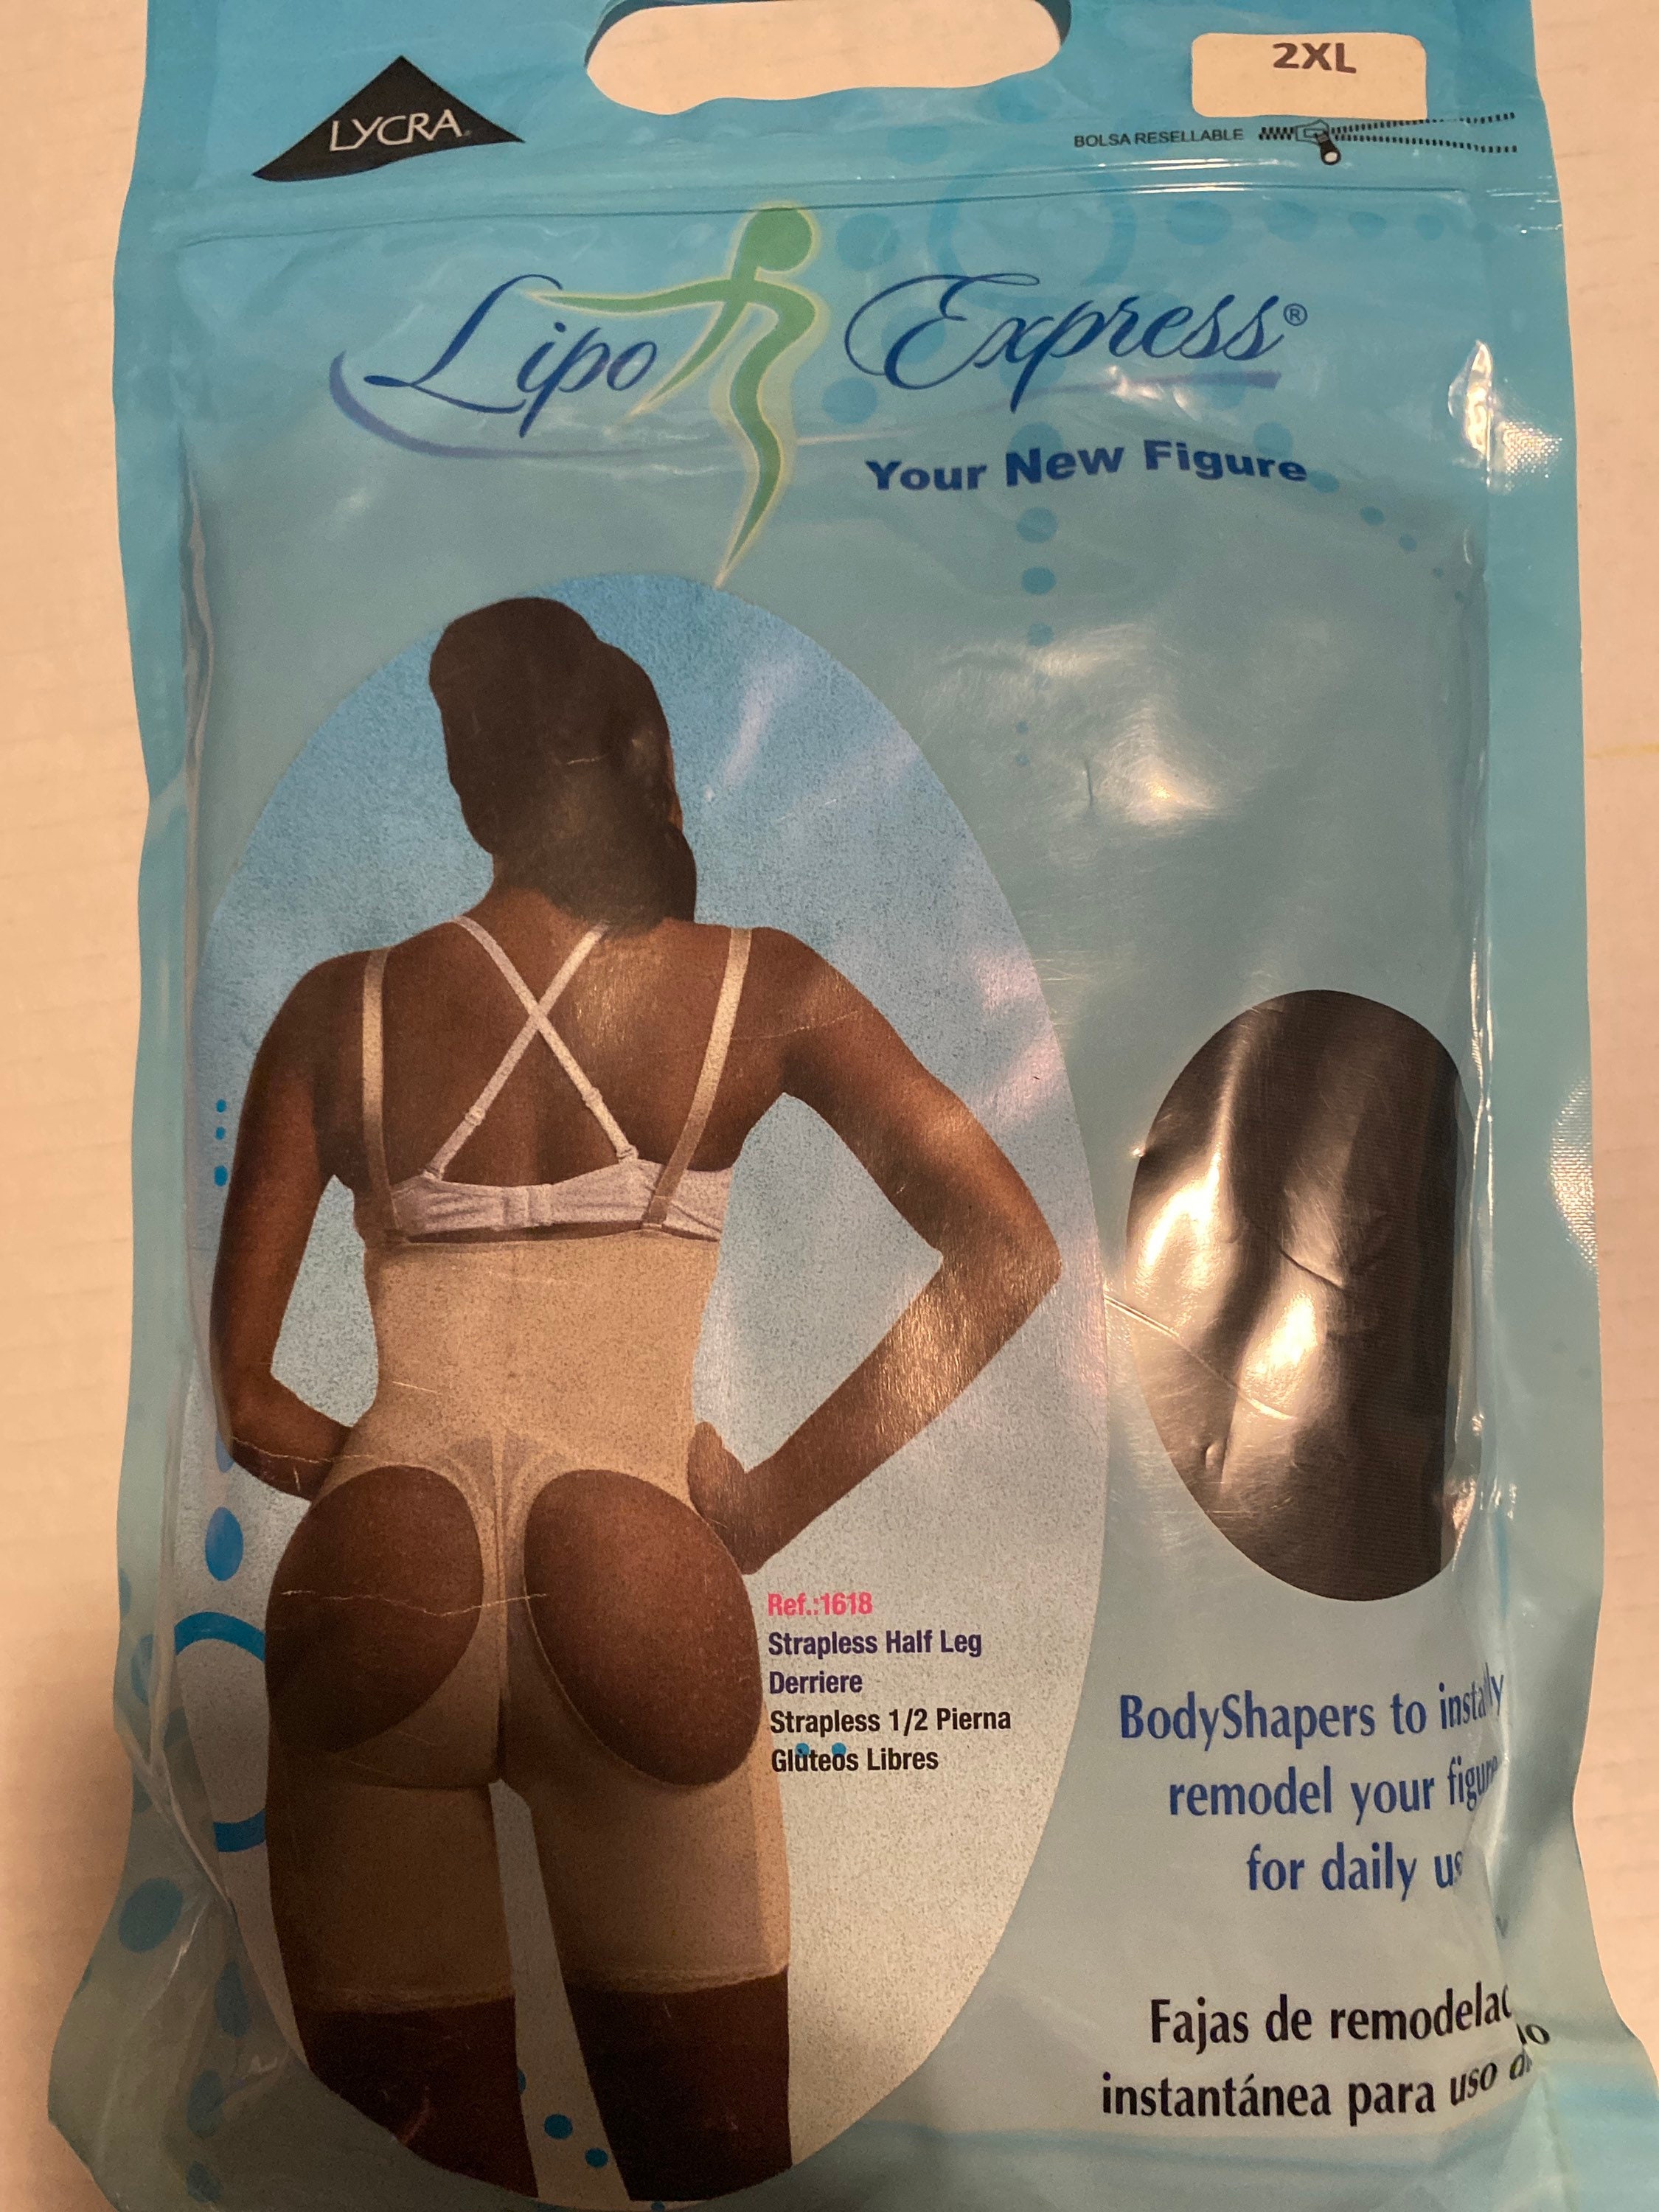 Body Shaper/ Lipo Express Curves Bodyshaper Faja. Size 2XL Choose From Different  Color and Style in the Pictures -  Denmark